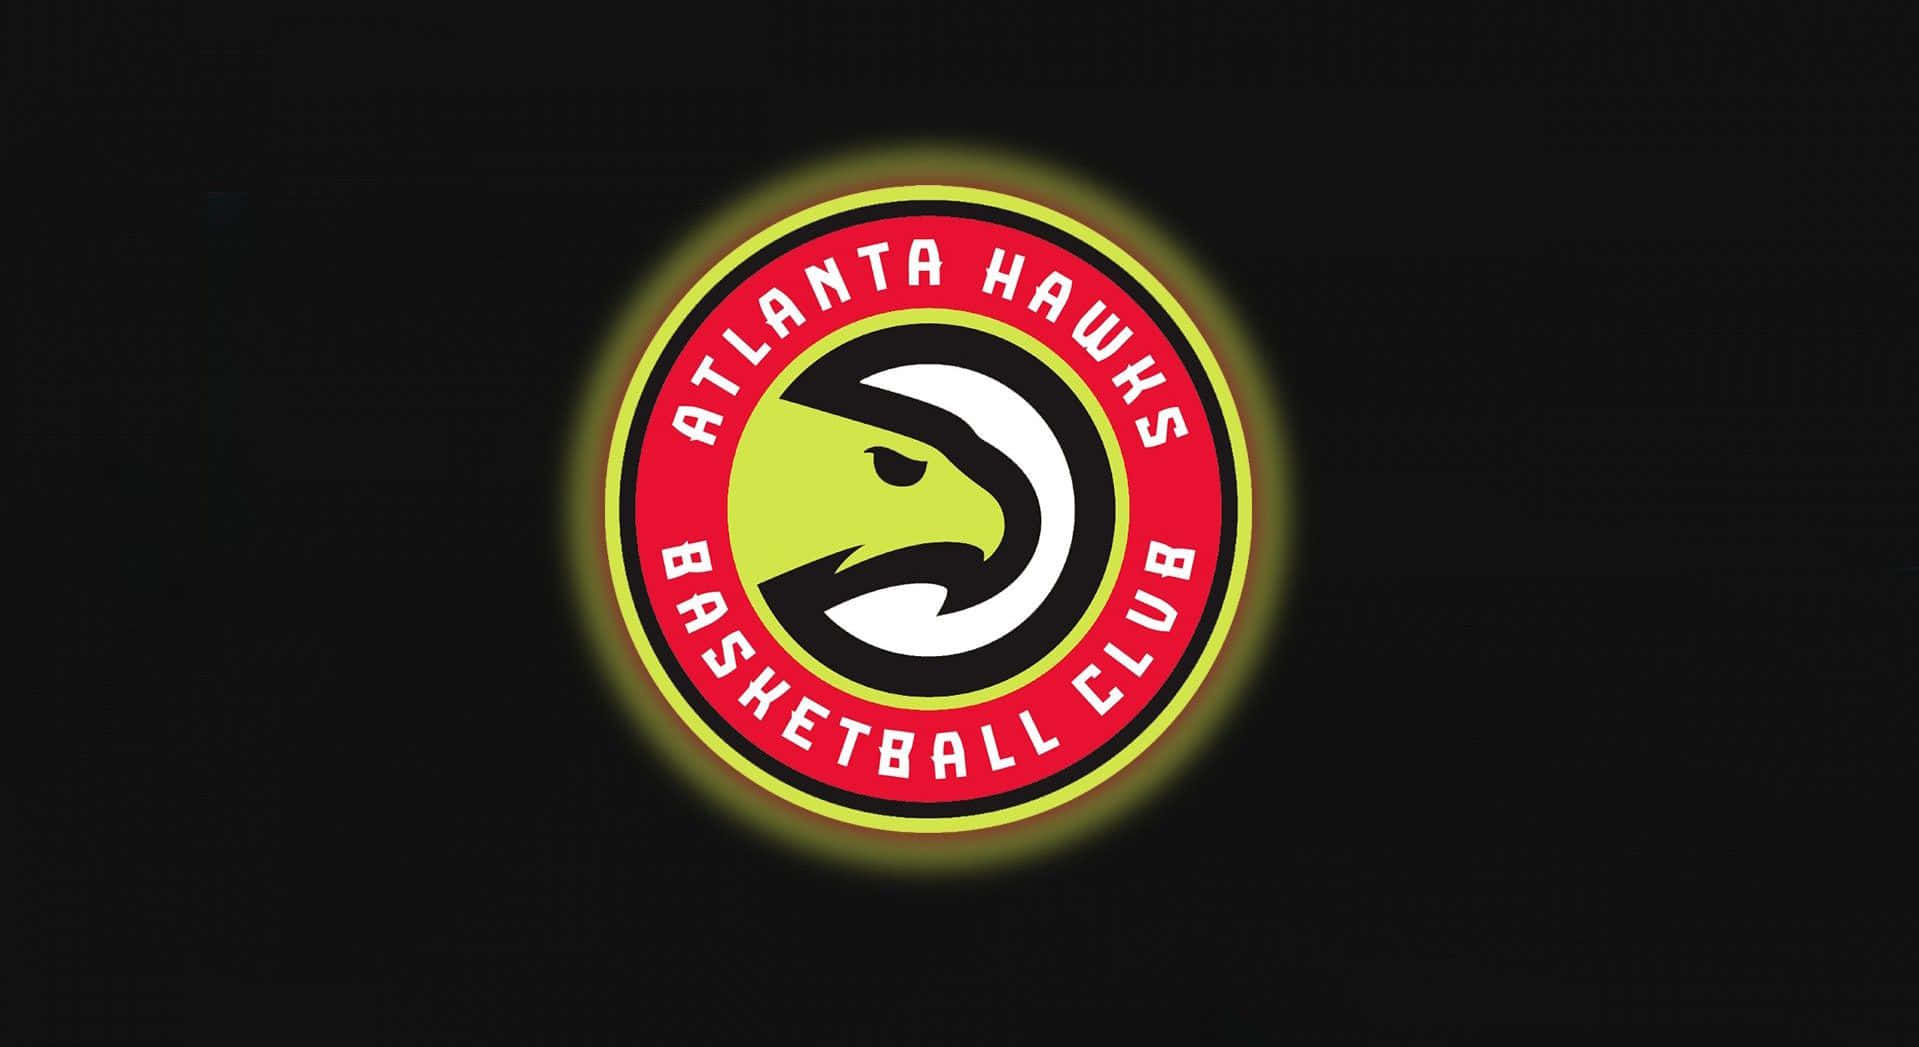 Feel the energy and excitement of the Atlanta Hawks with this powerful image.